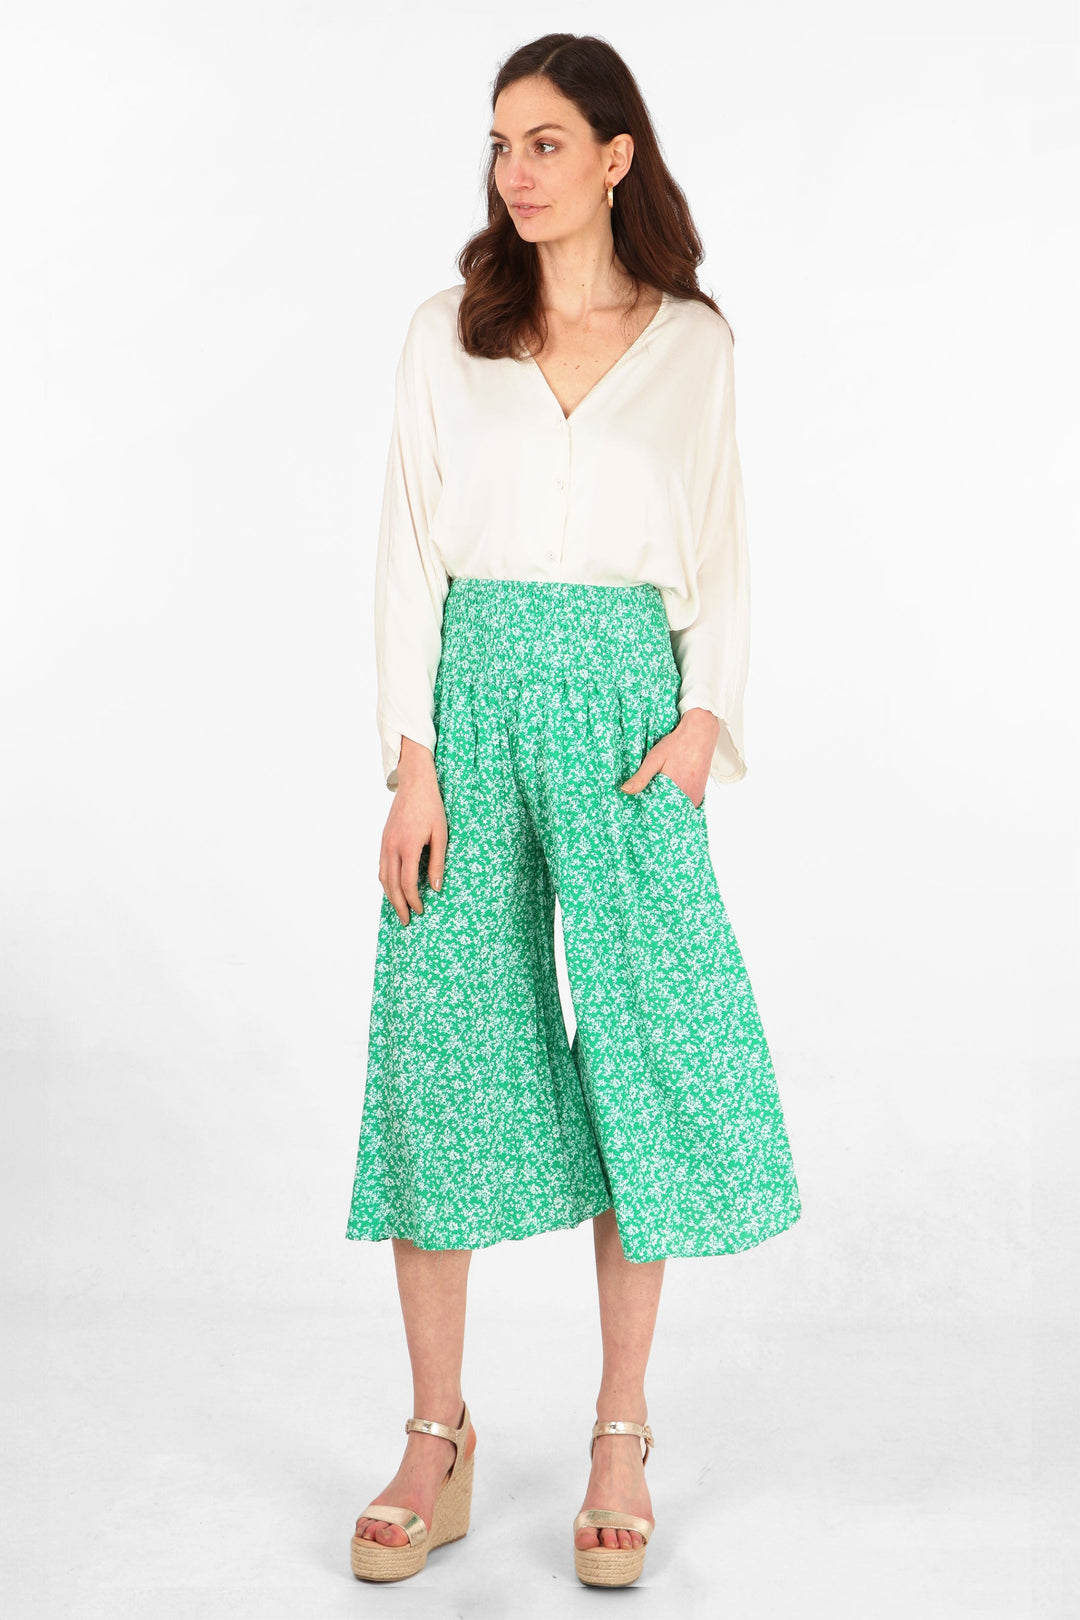 model wearing green and white ditsy floral pattern wide leg culottes